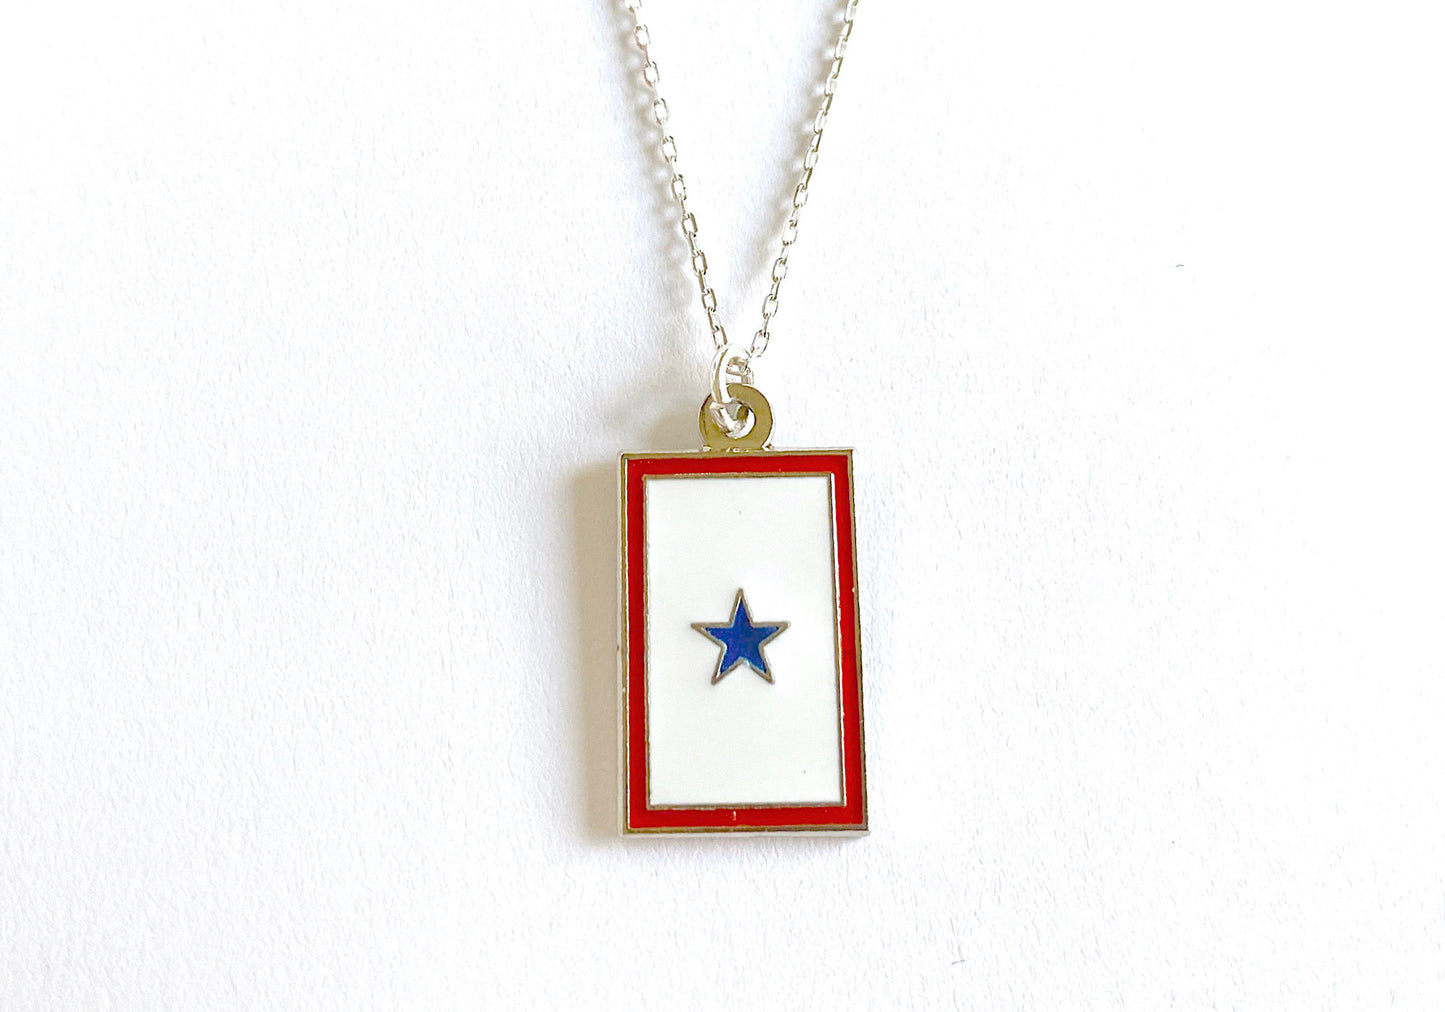 Blue Star (1 Star) Banner Charm Necklace